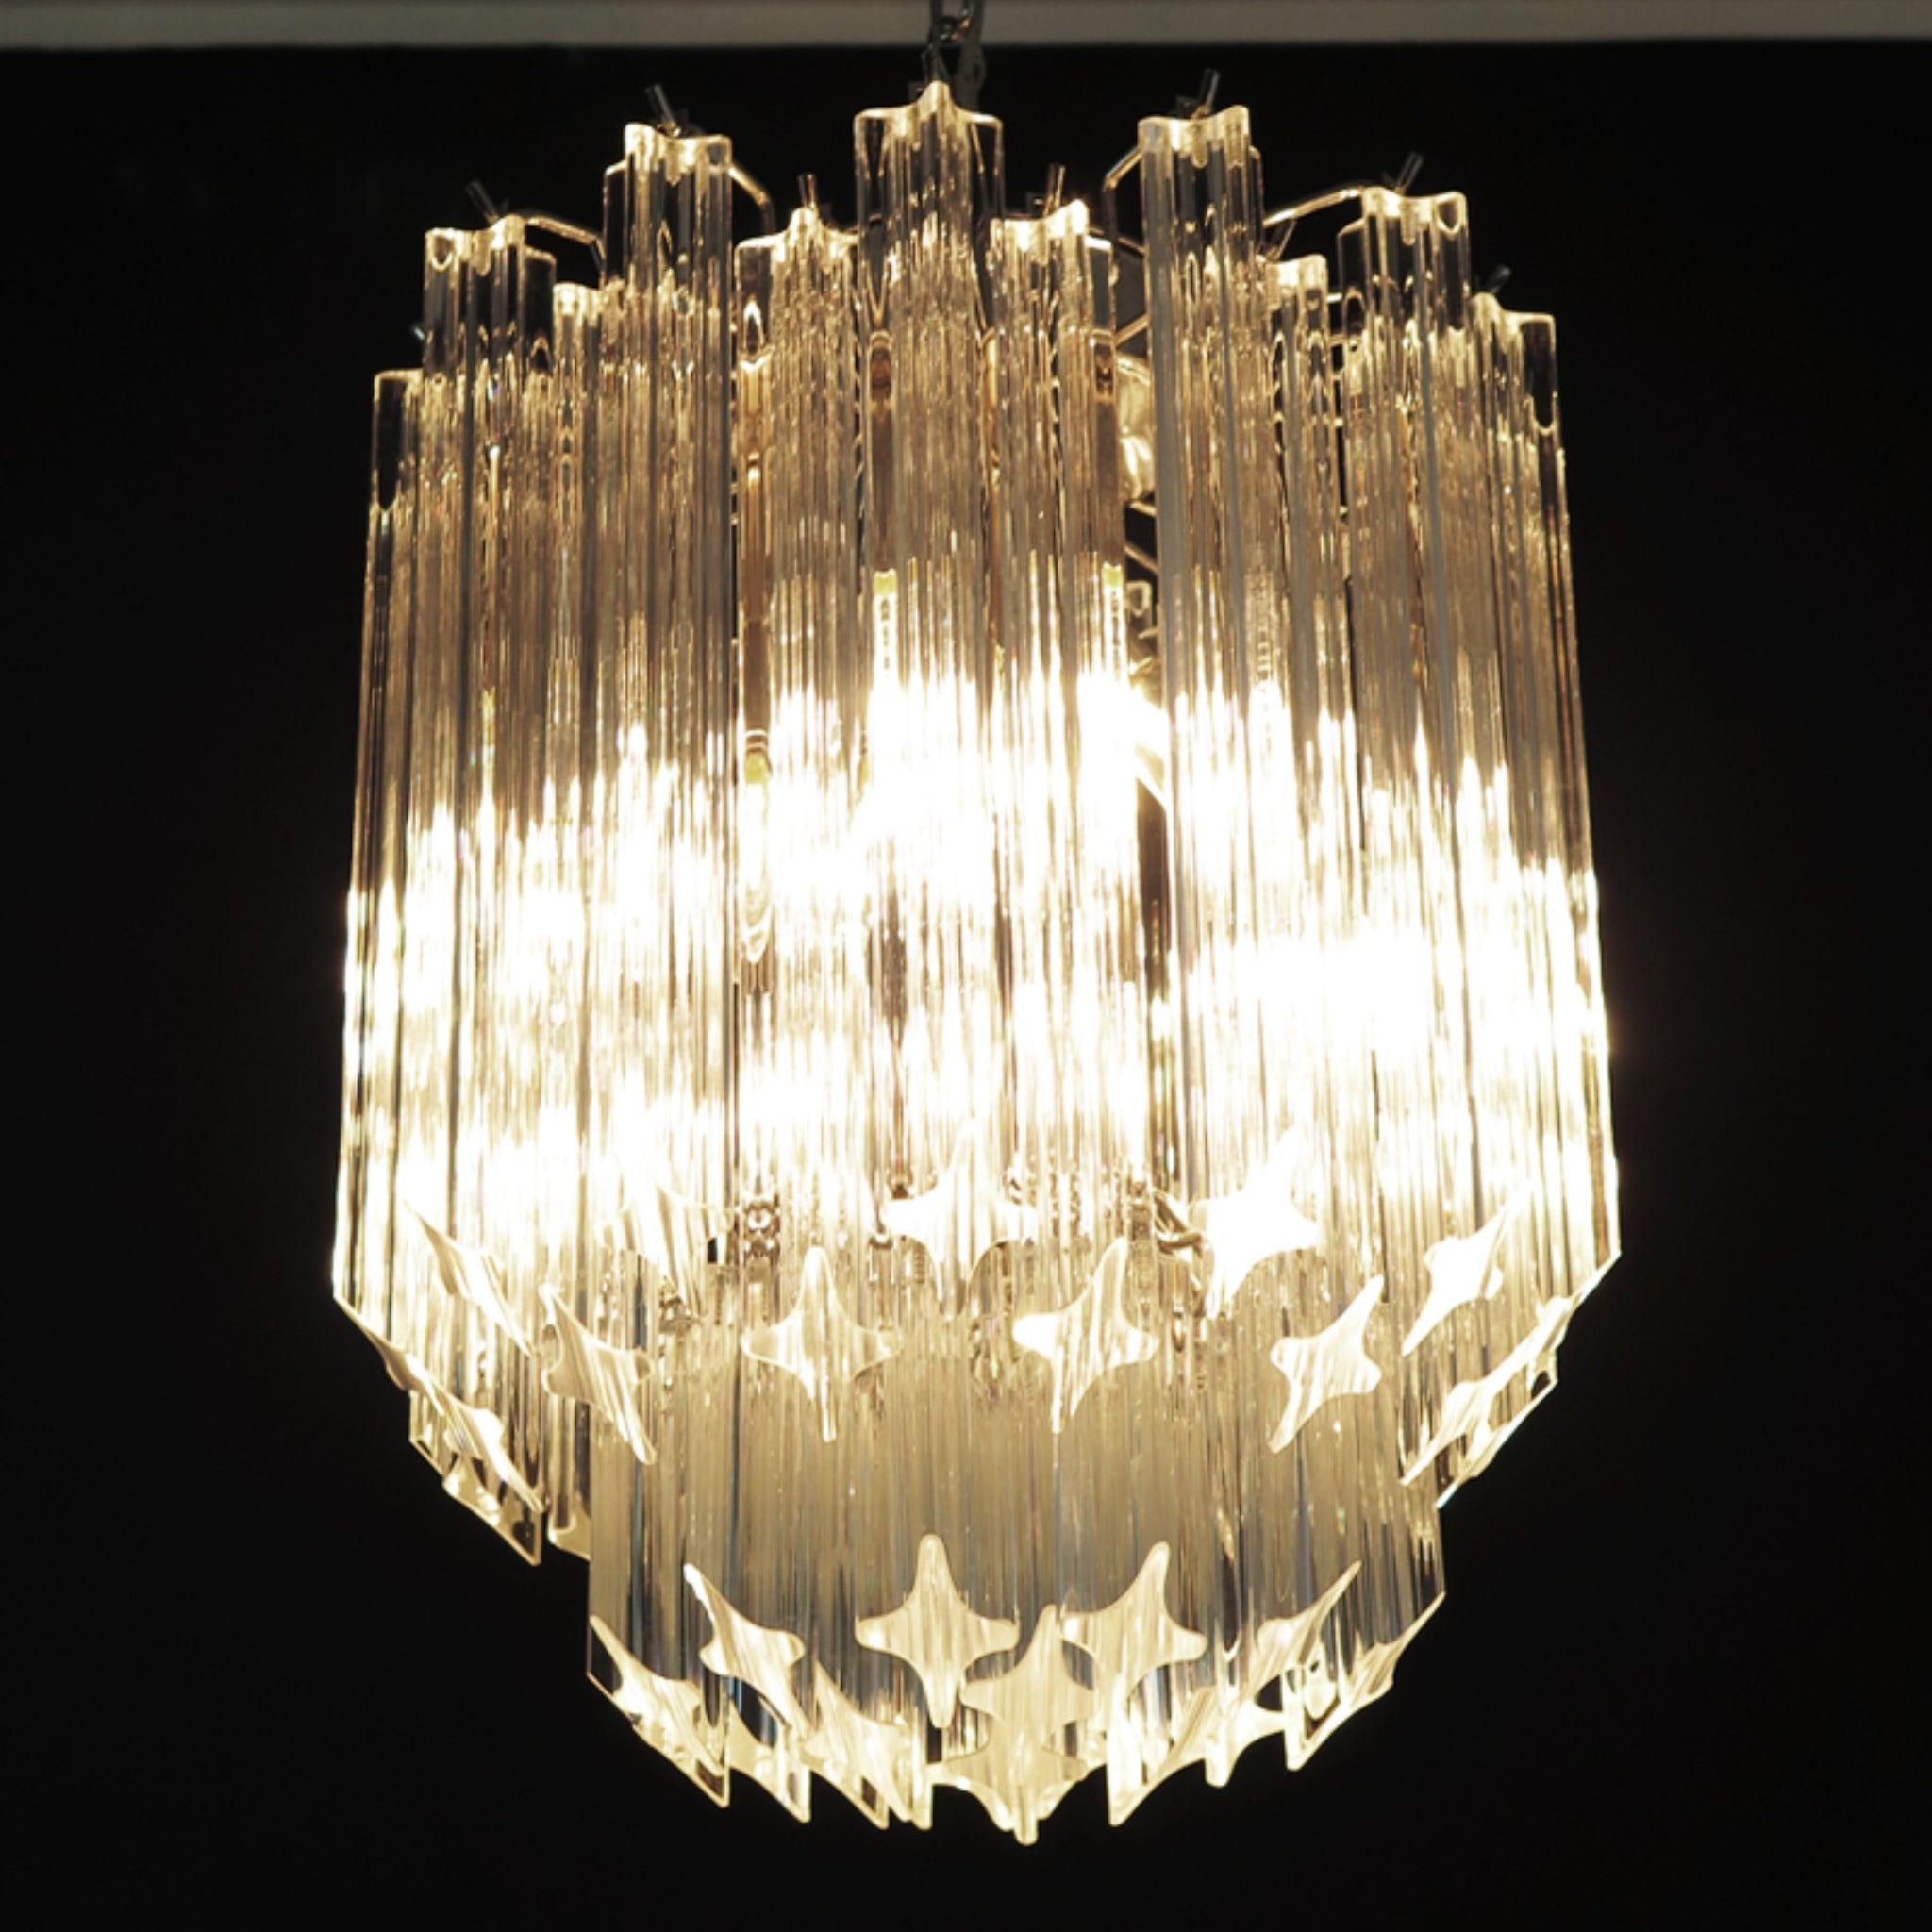 Murano Chandelier with 47 transparent prisms